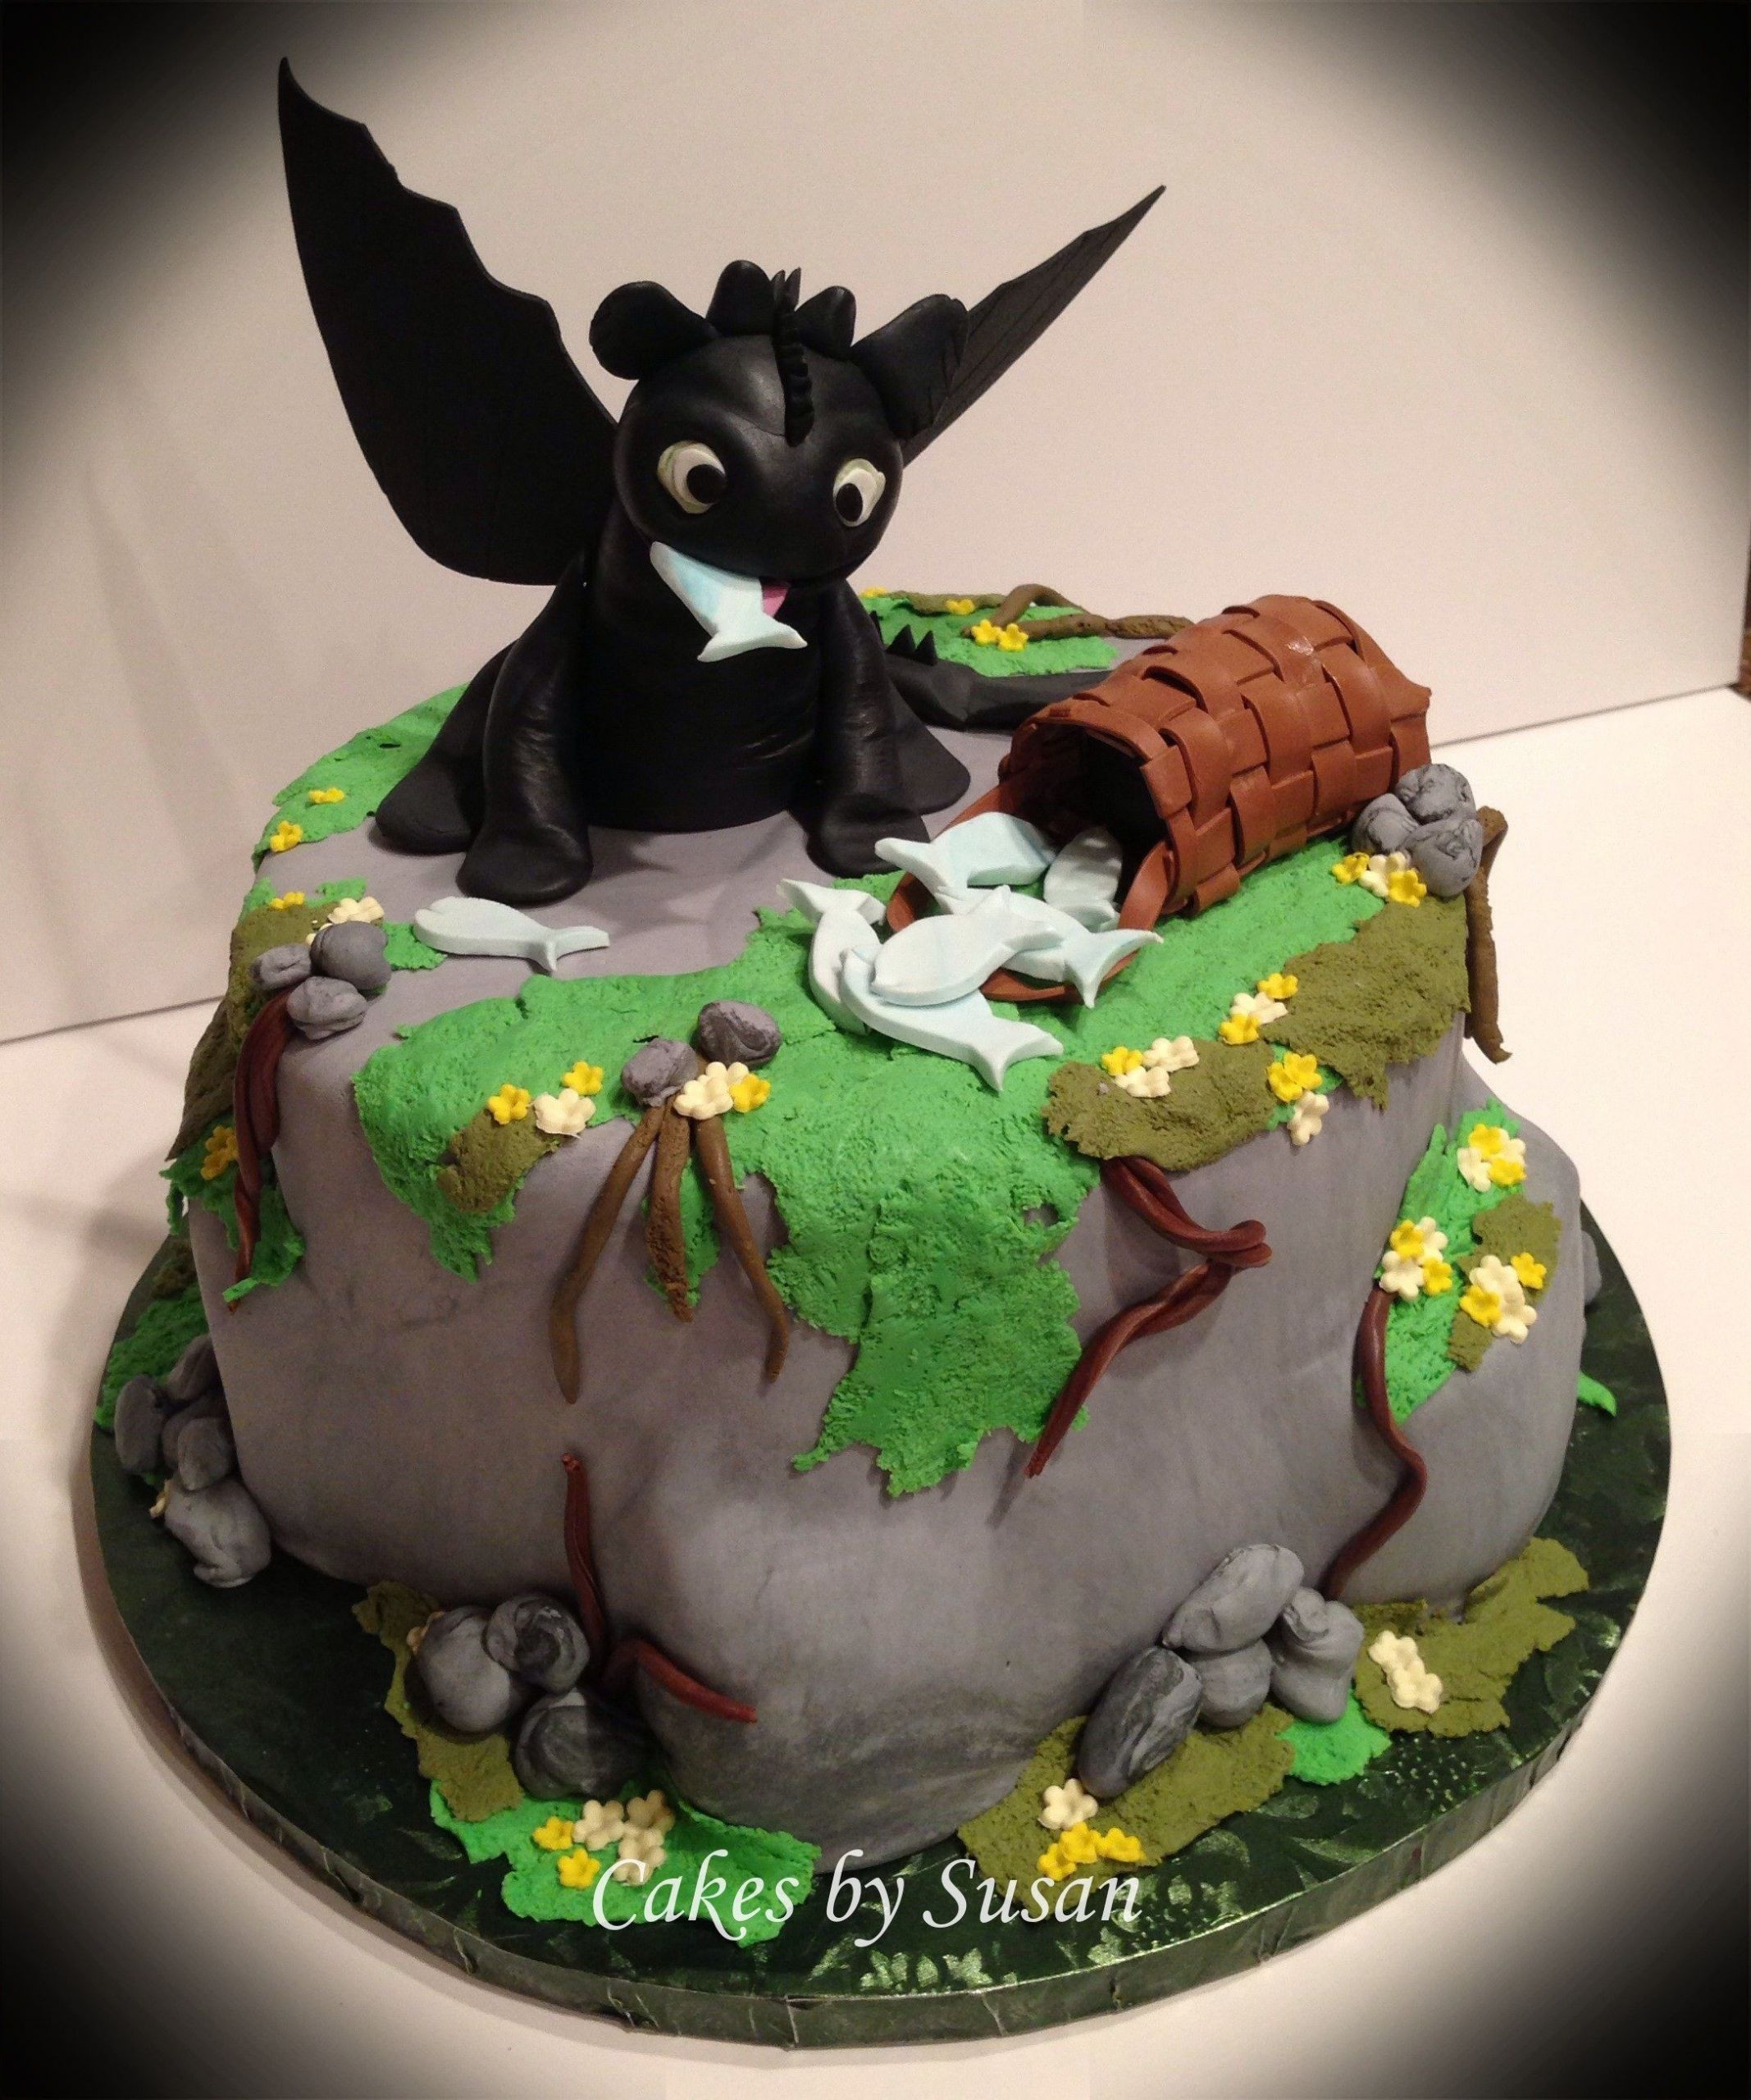 How To Train Your Dragon Birthday Cake
 Birthday Cakes Toothless the dragon birthday cake